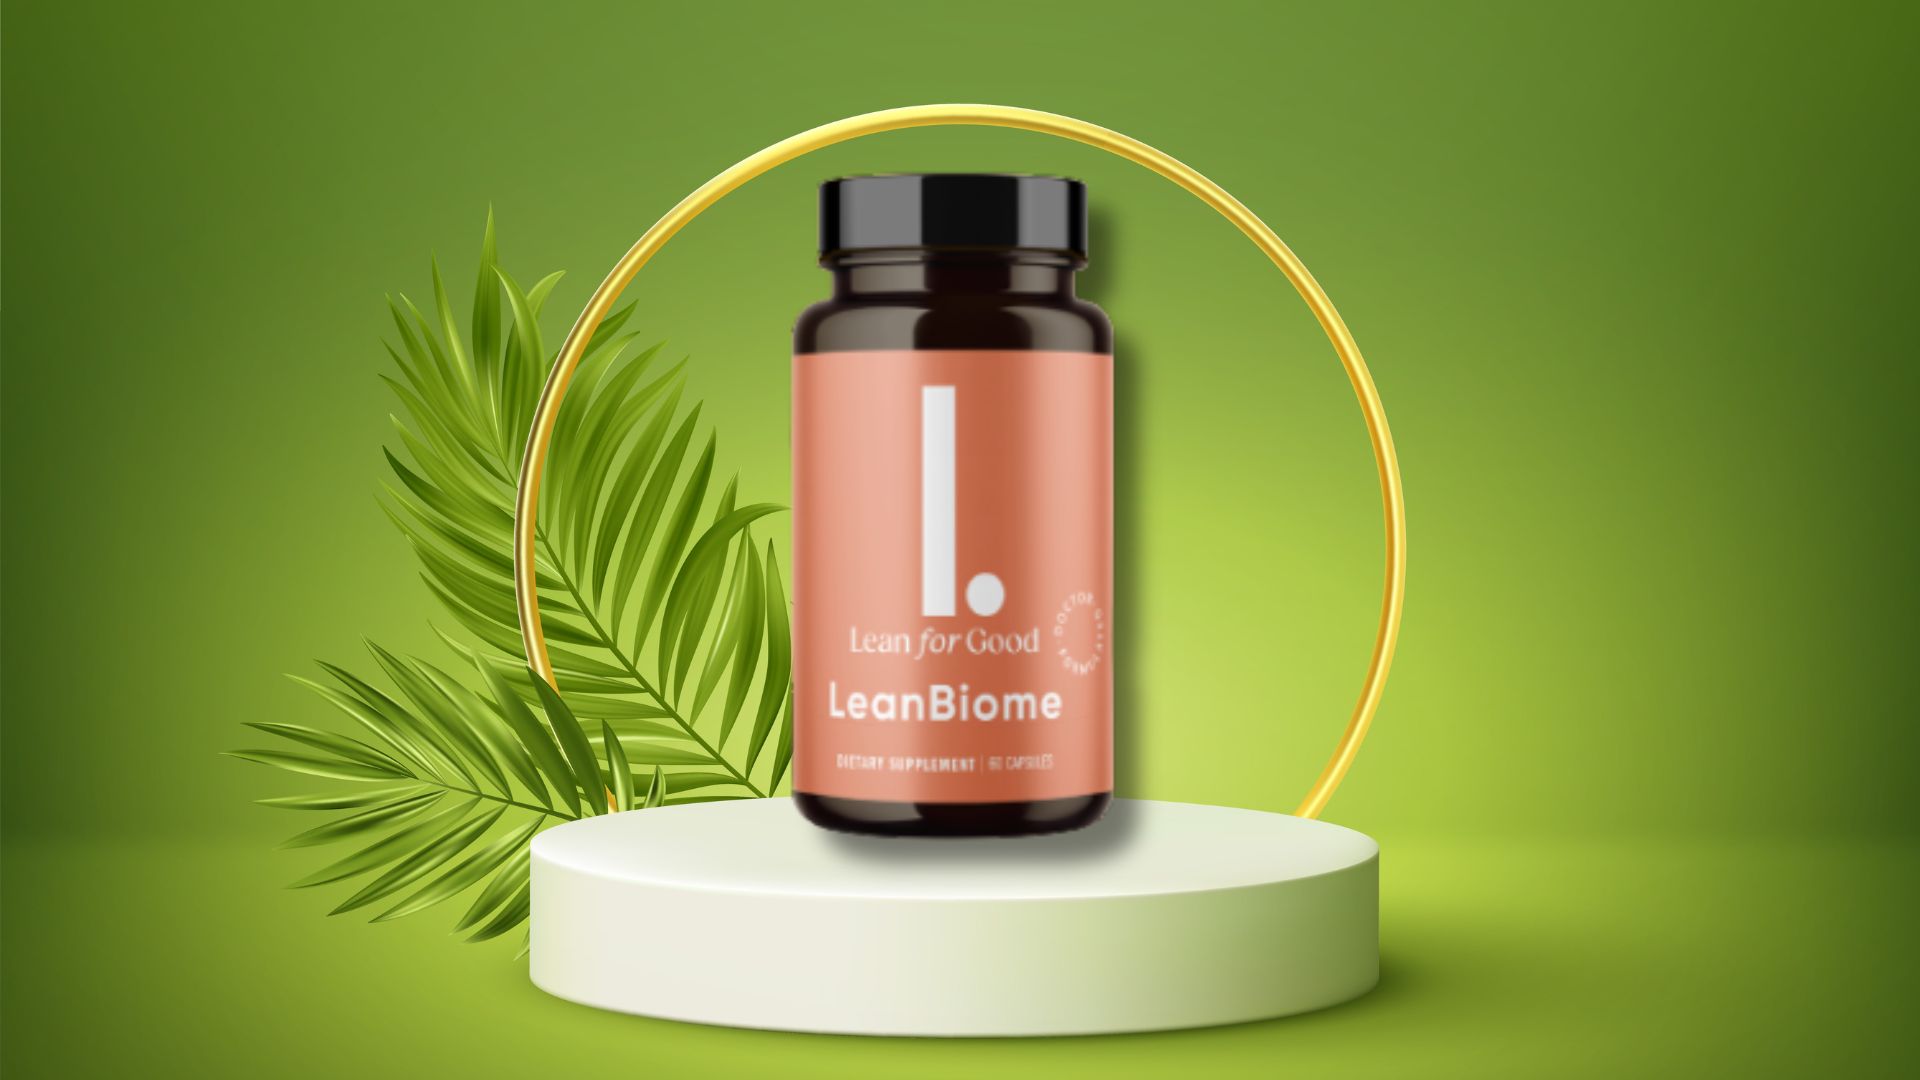 LeanBiome Reviews – Is This Fat Burner Worth Purchasing?